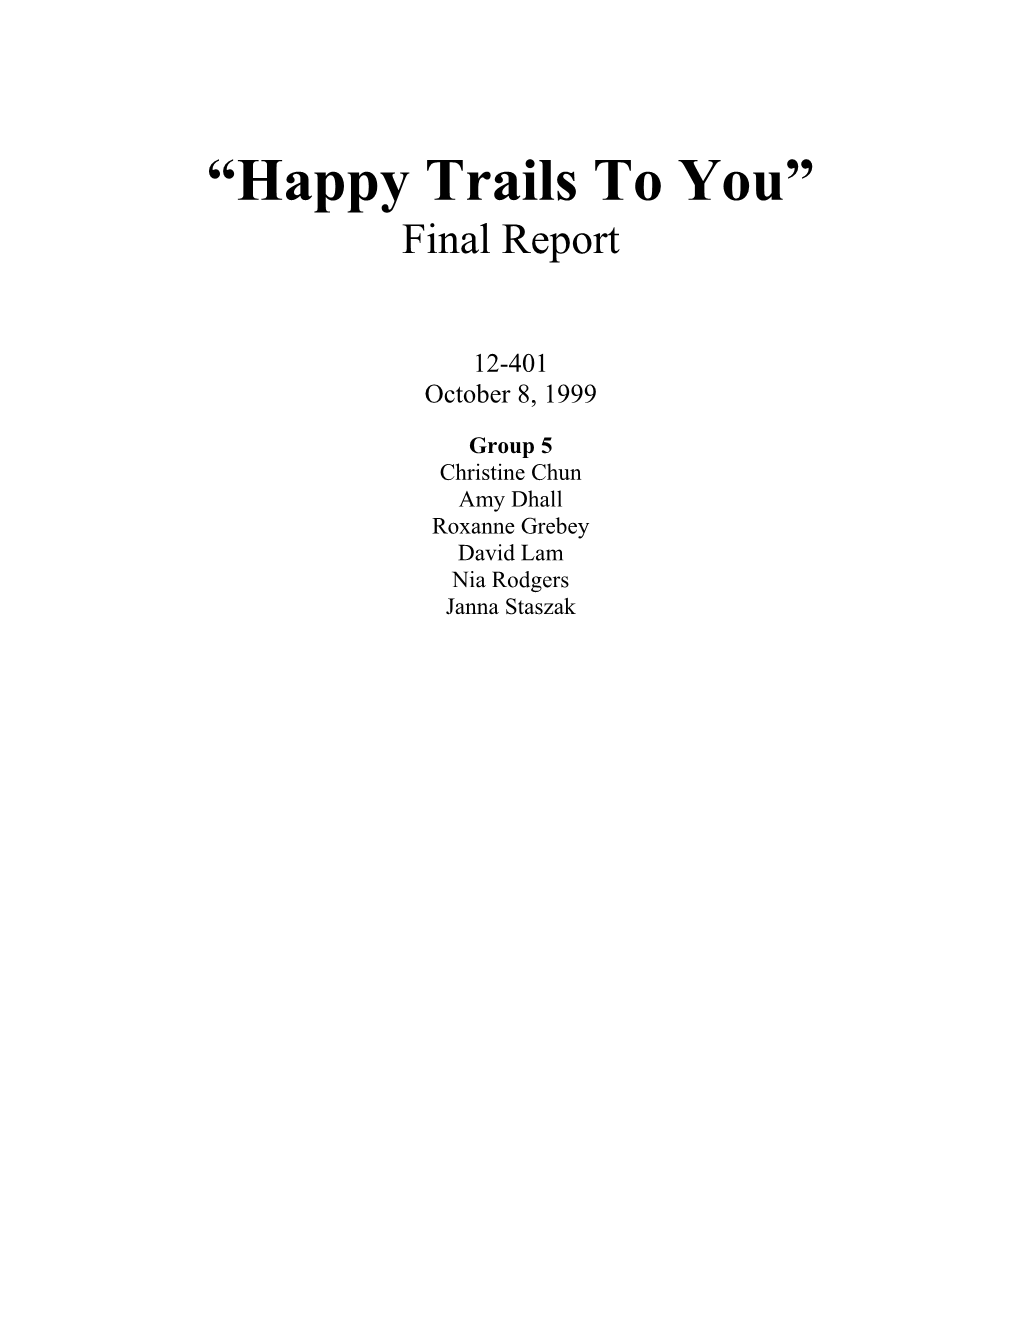 Happy Trails to You